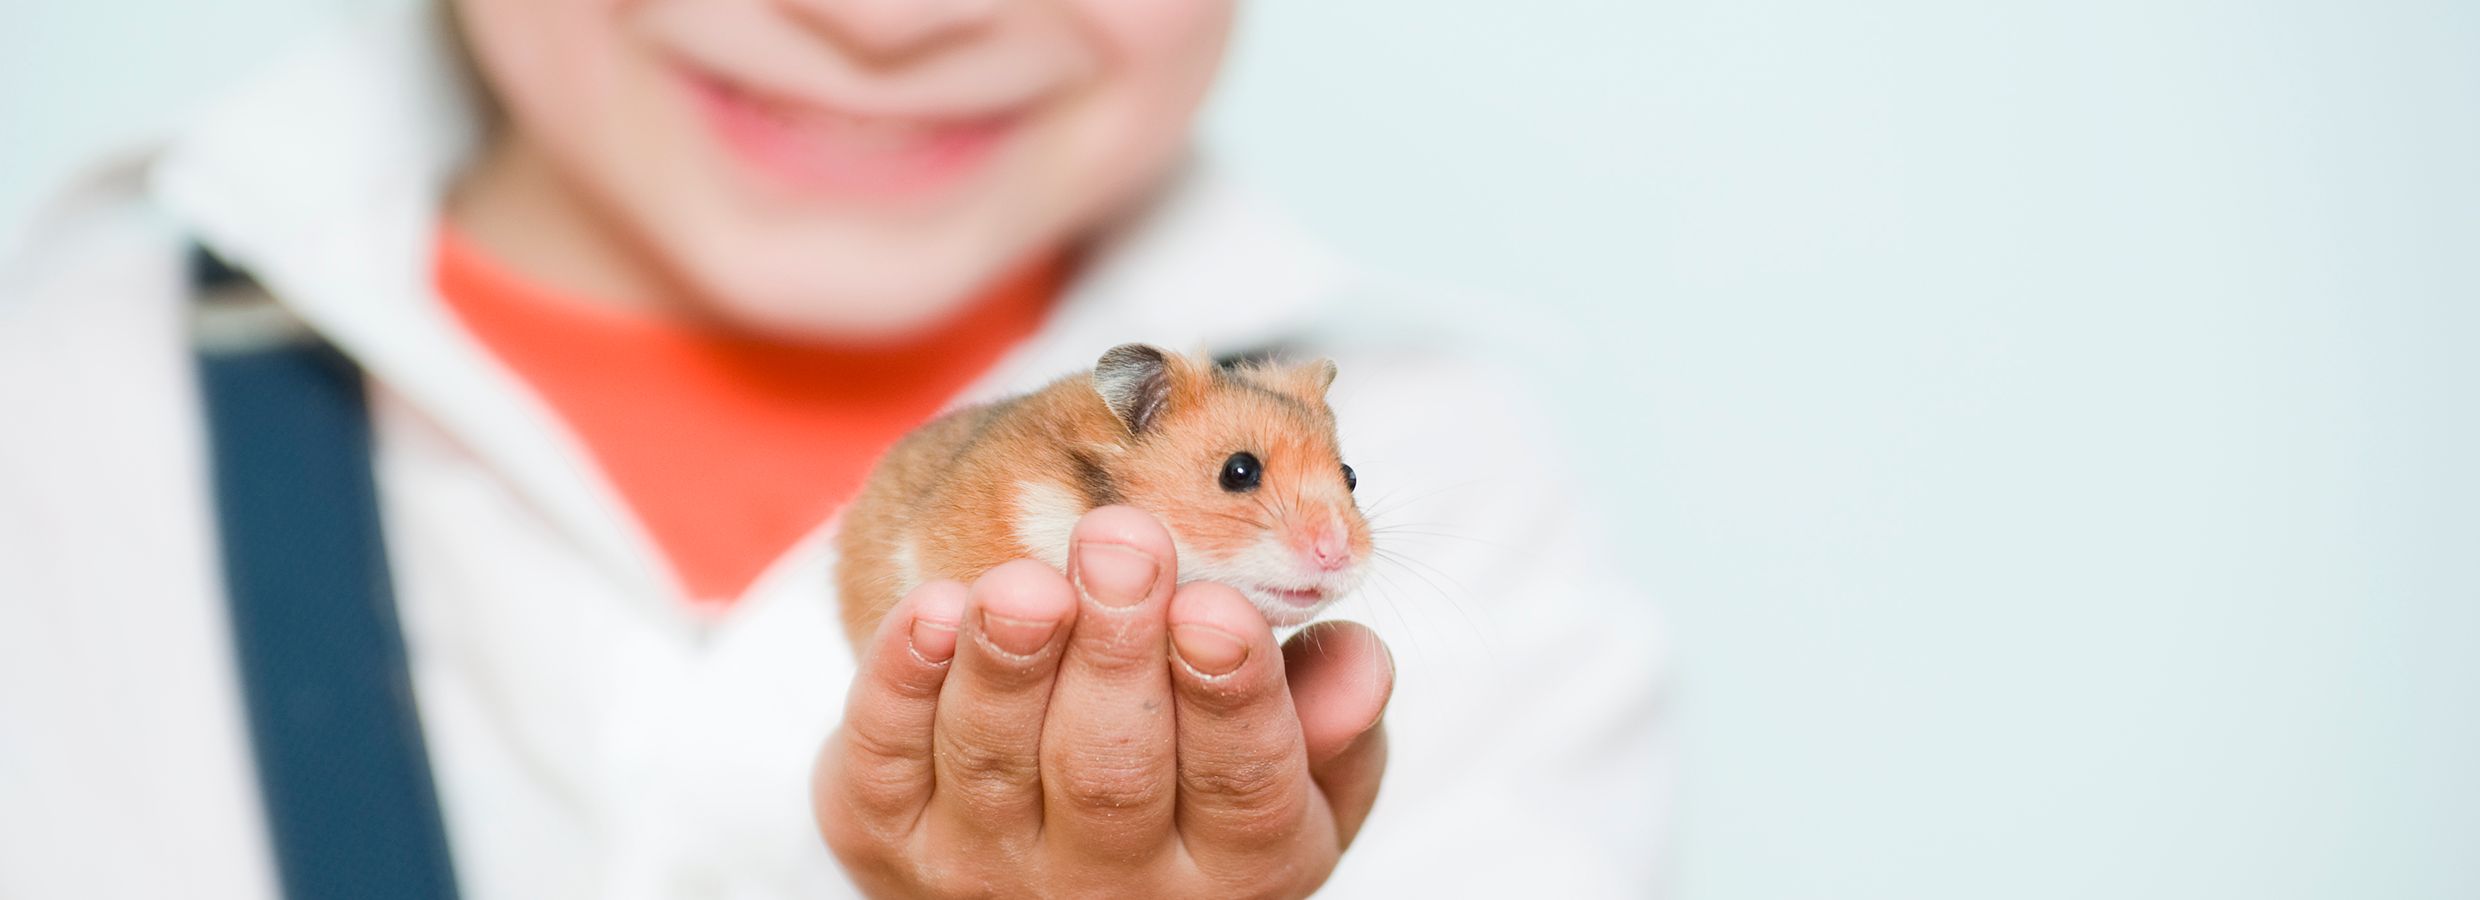 Teaching Children to Care for Small Pets